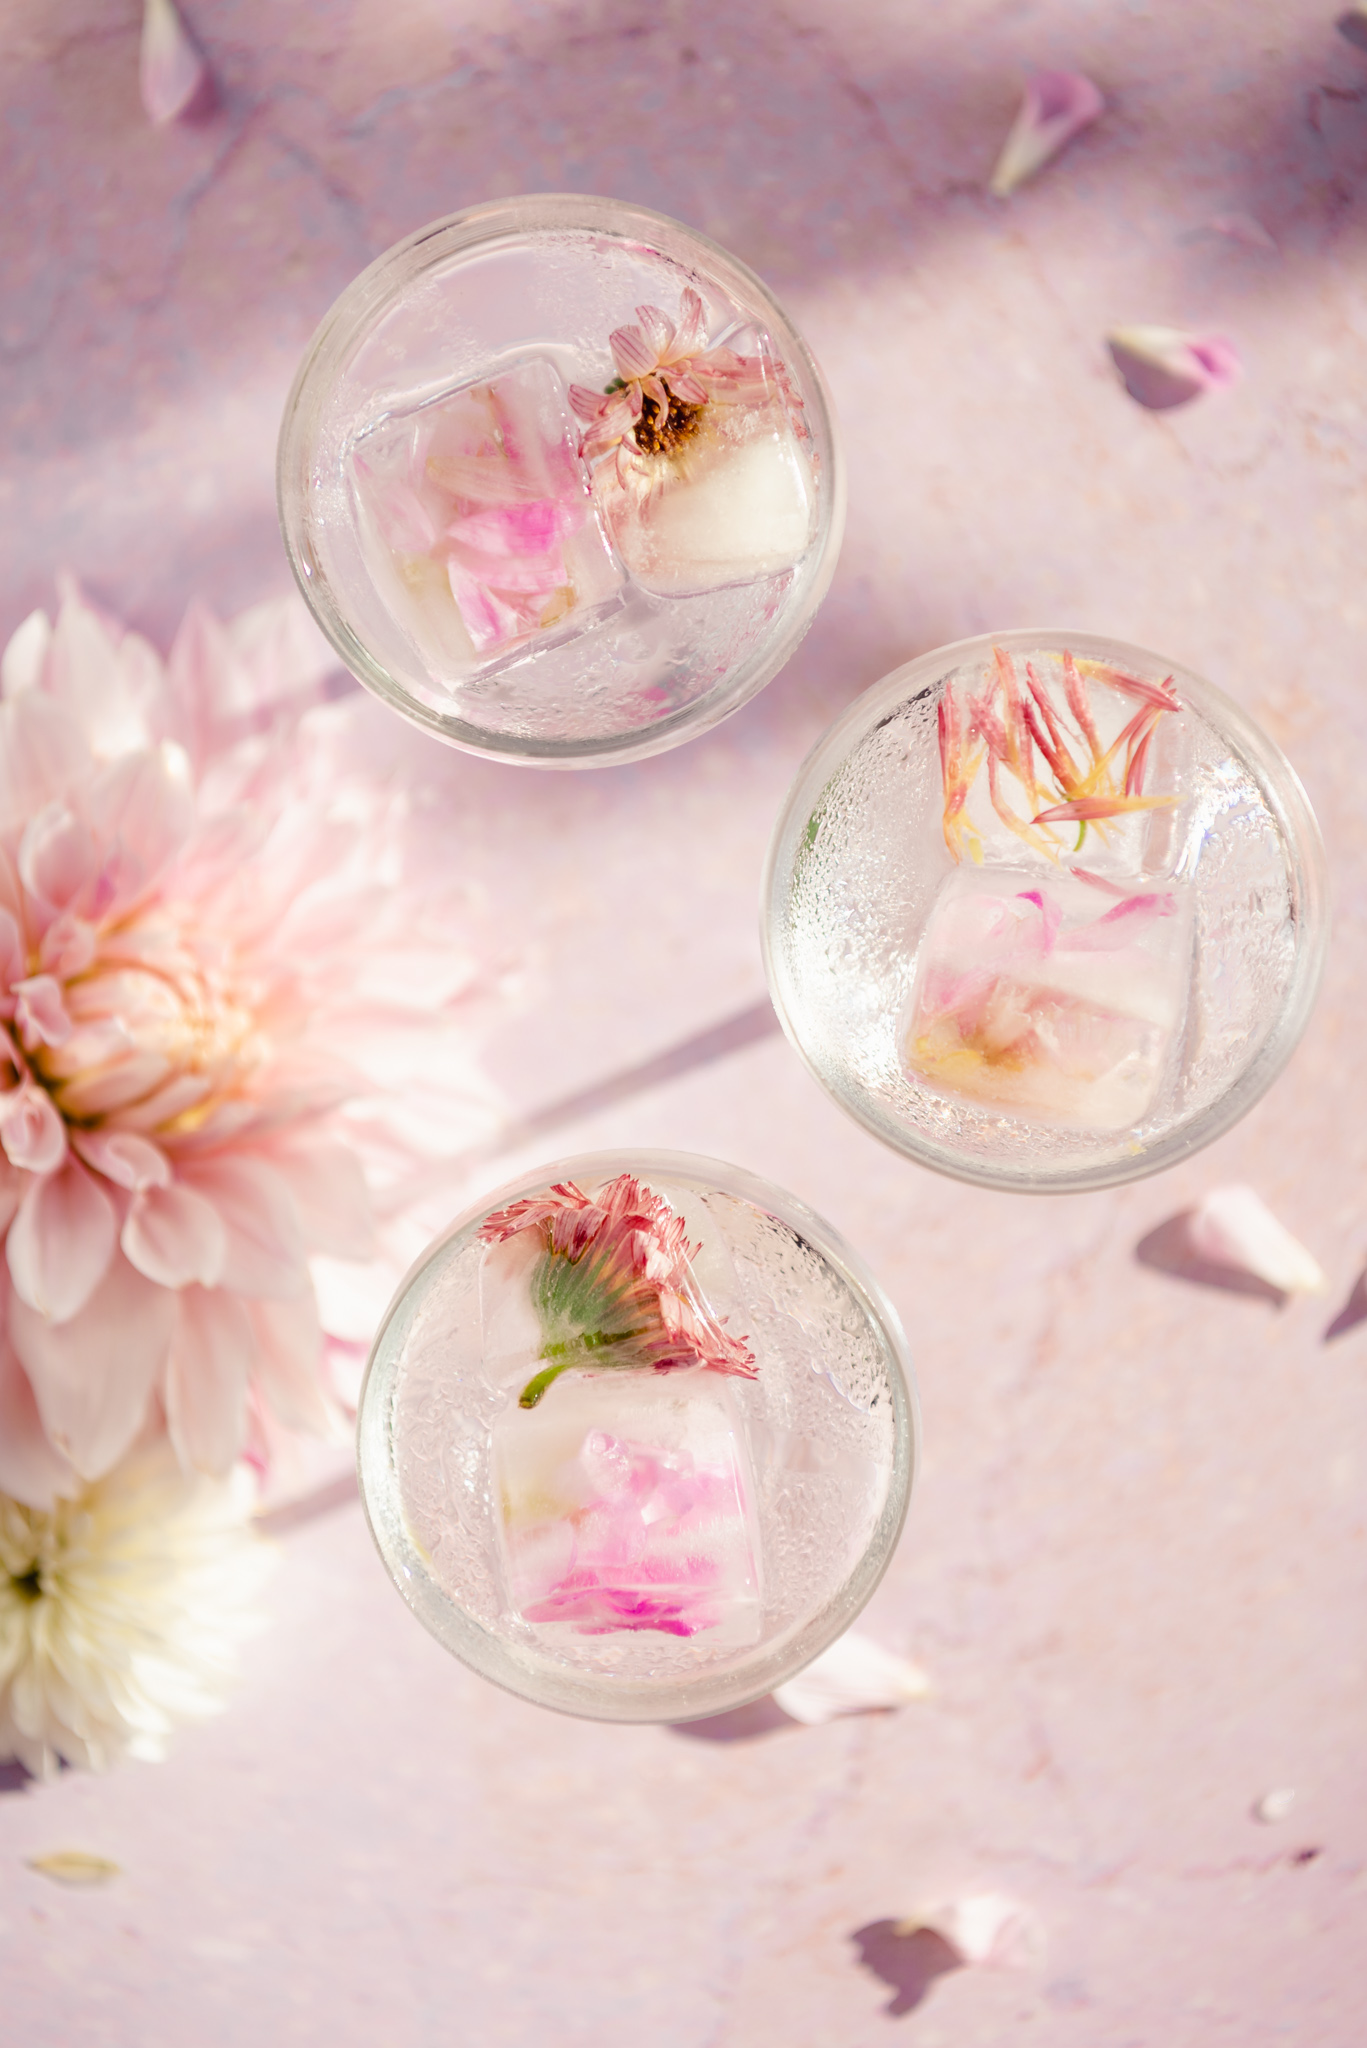 pink edible flowers in three glasses on pink surface with dahlias